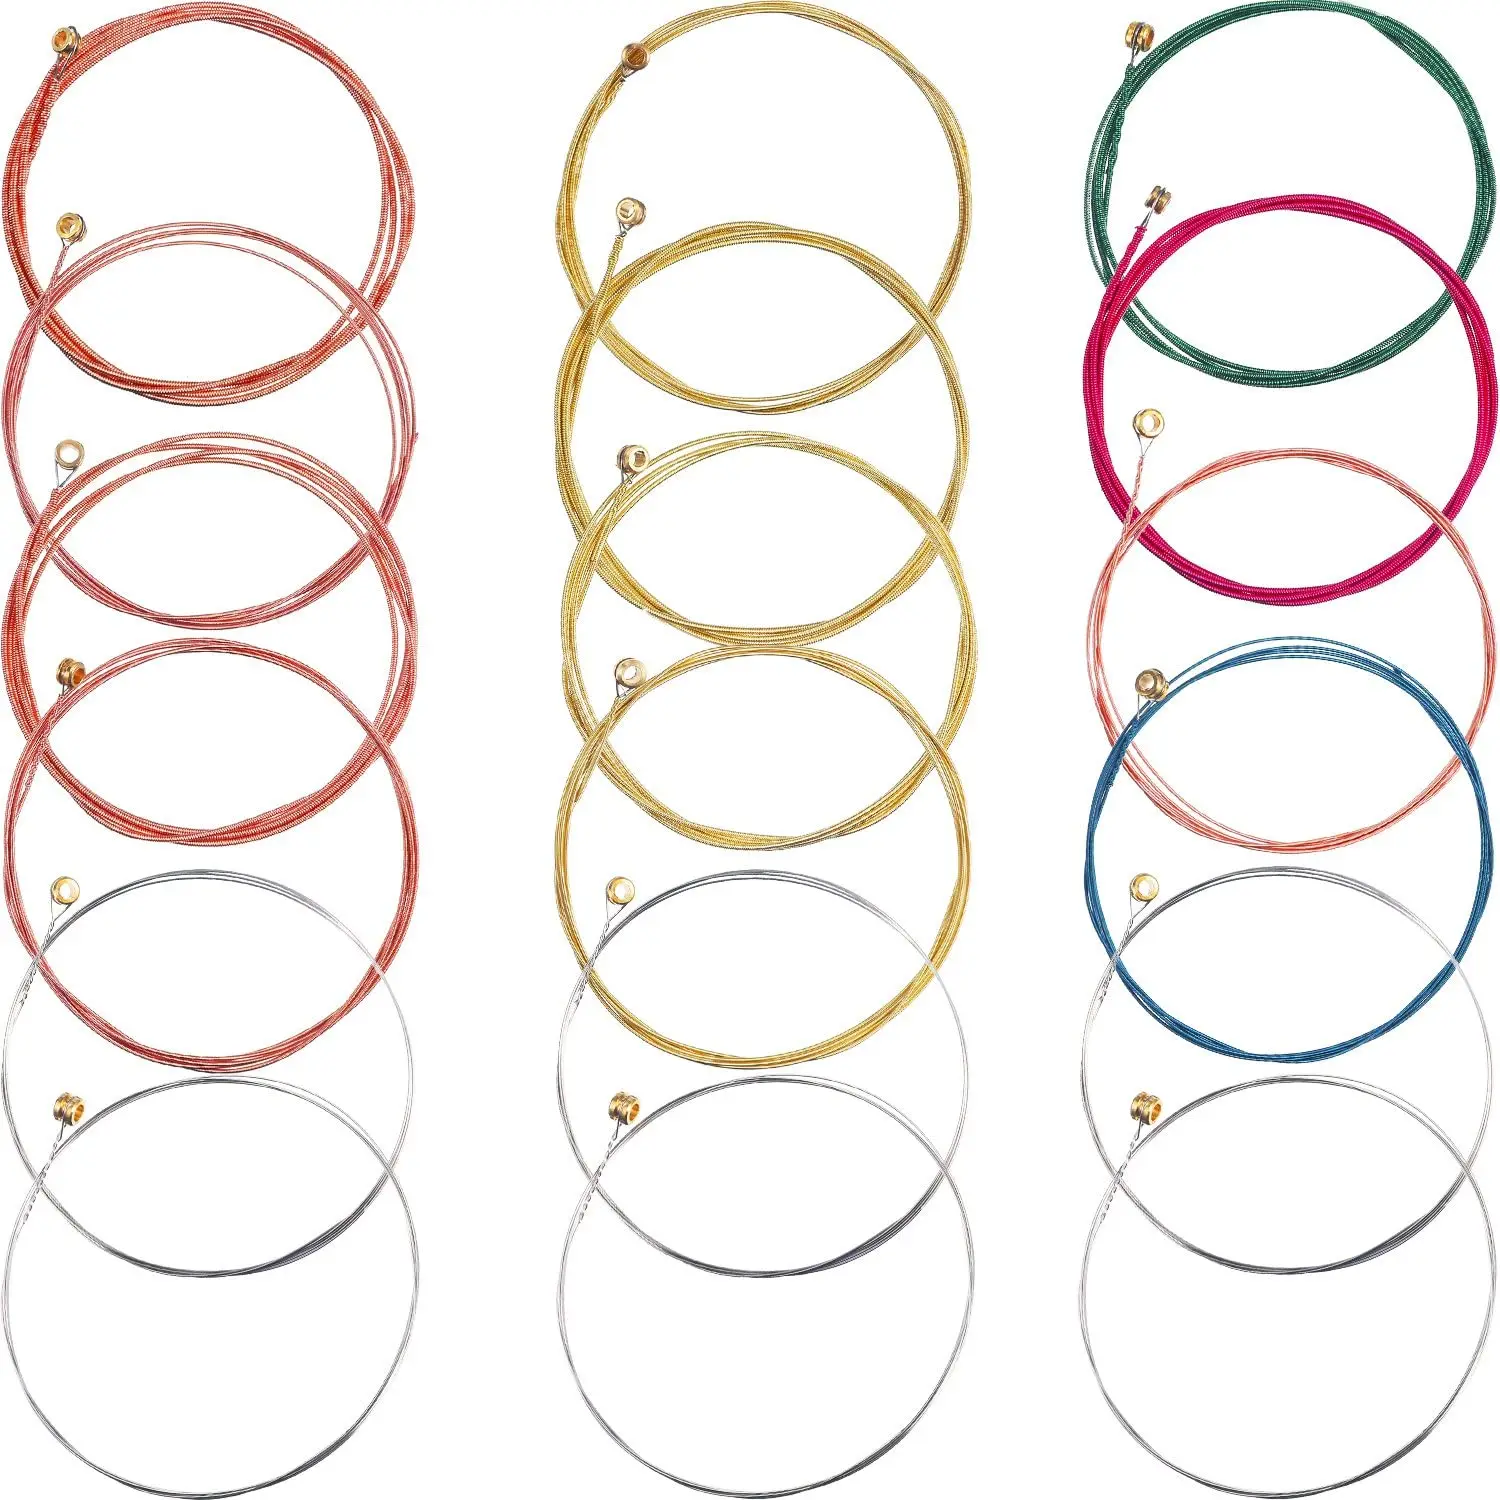 

Different Style and Color Wholesale Price Acoustic Guitar Strings Sets String Guitar For Beginner, Brass copper colorful